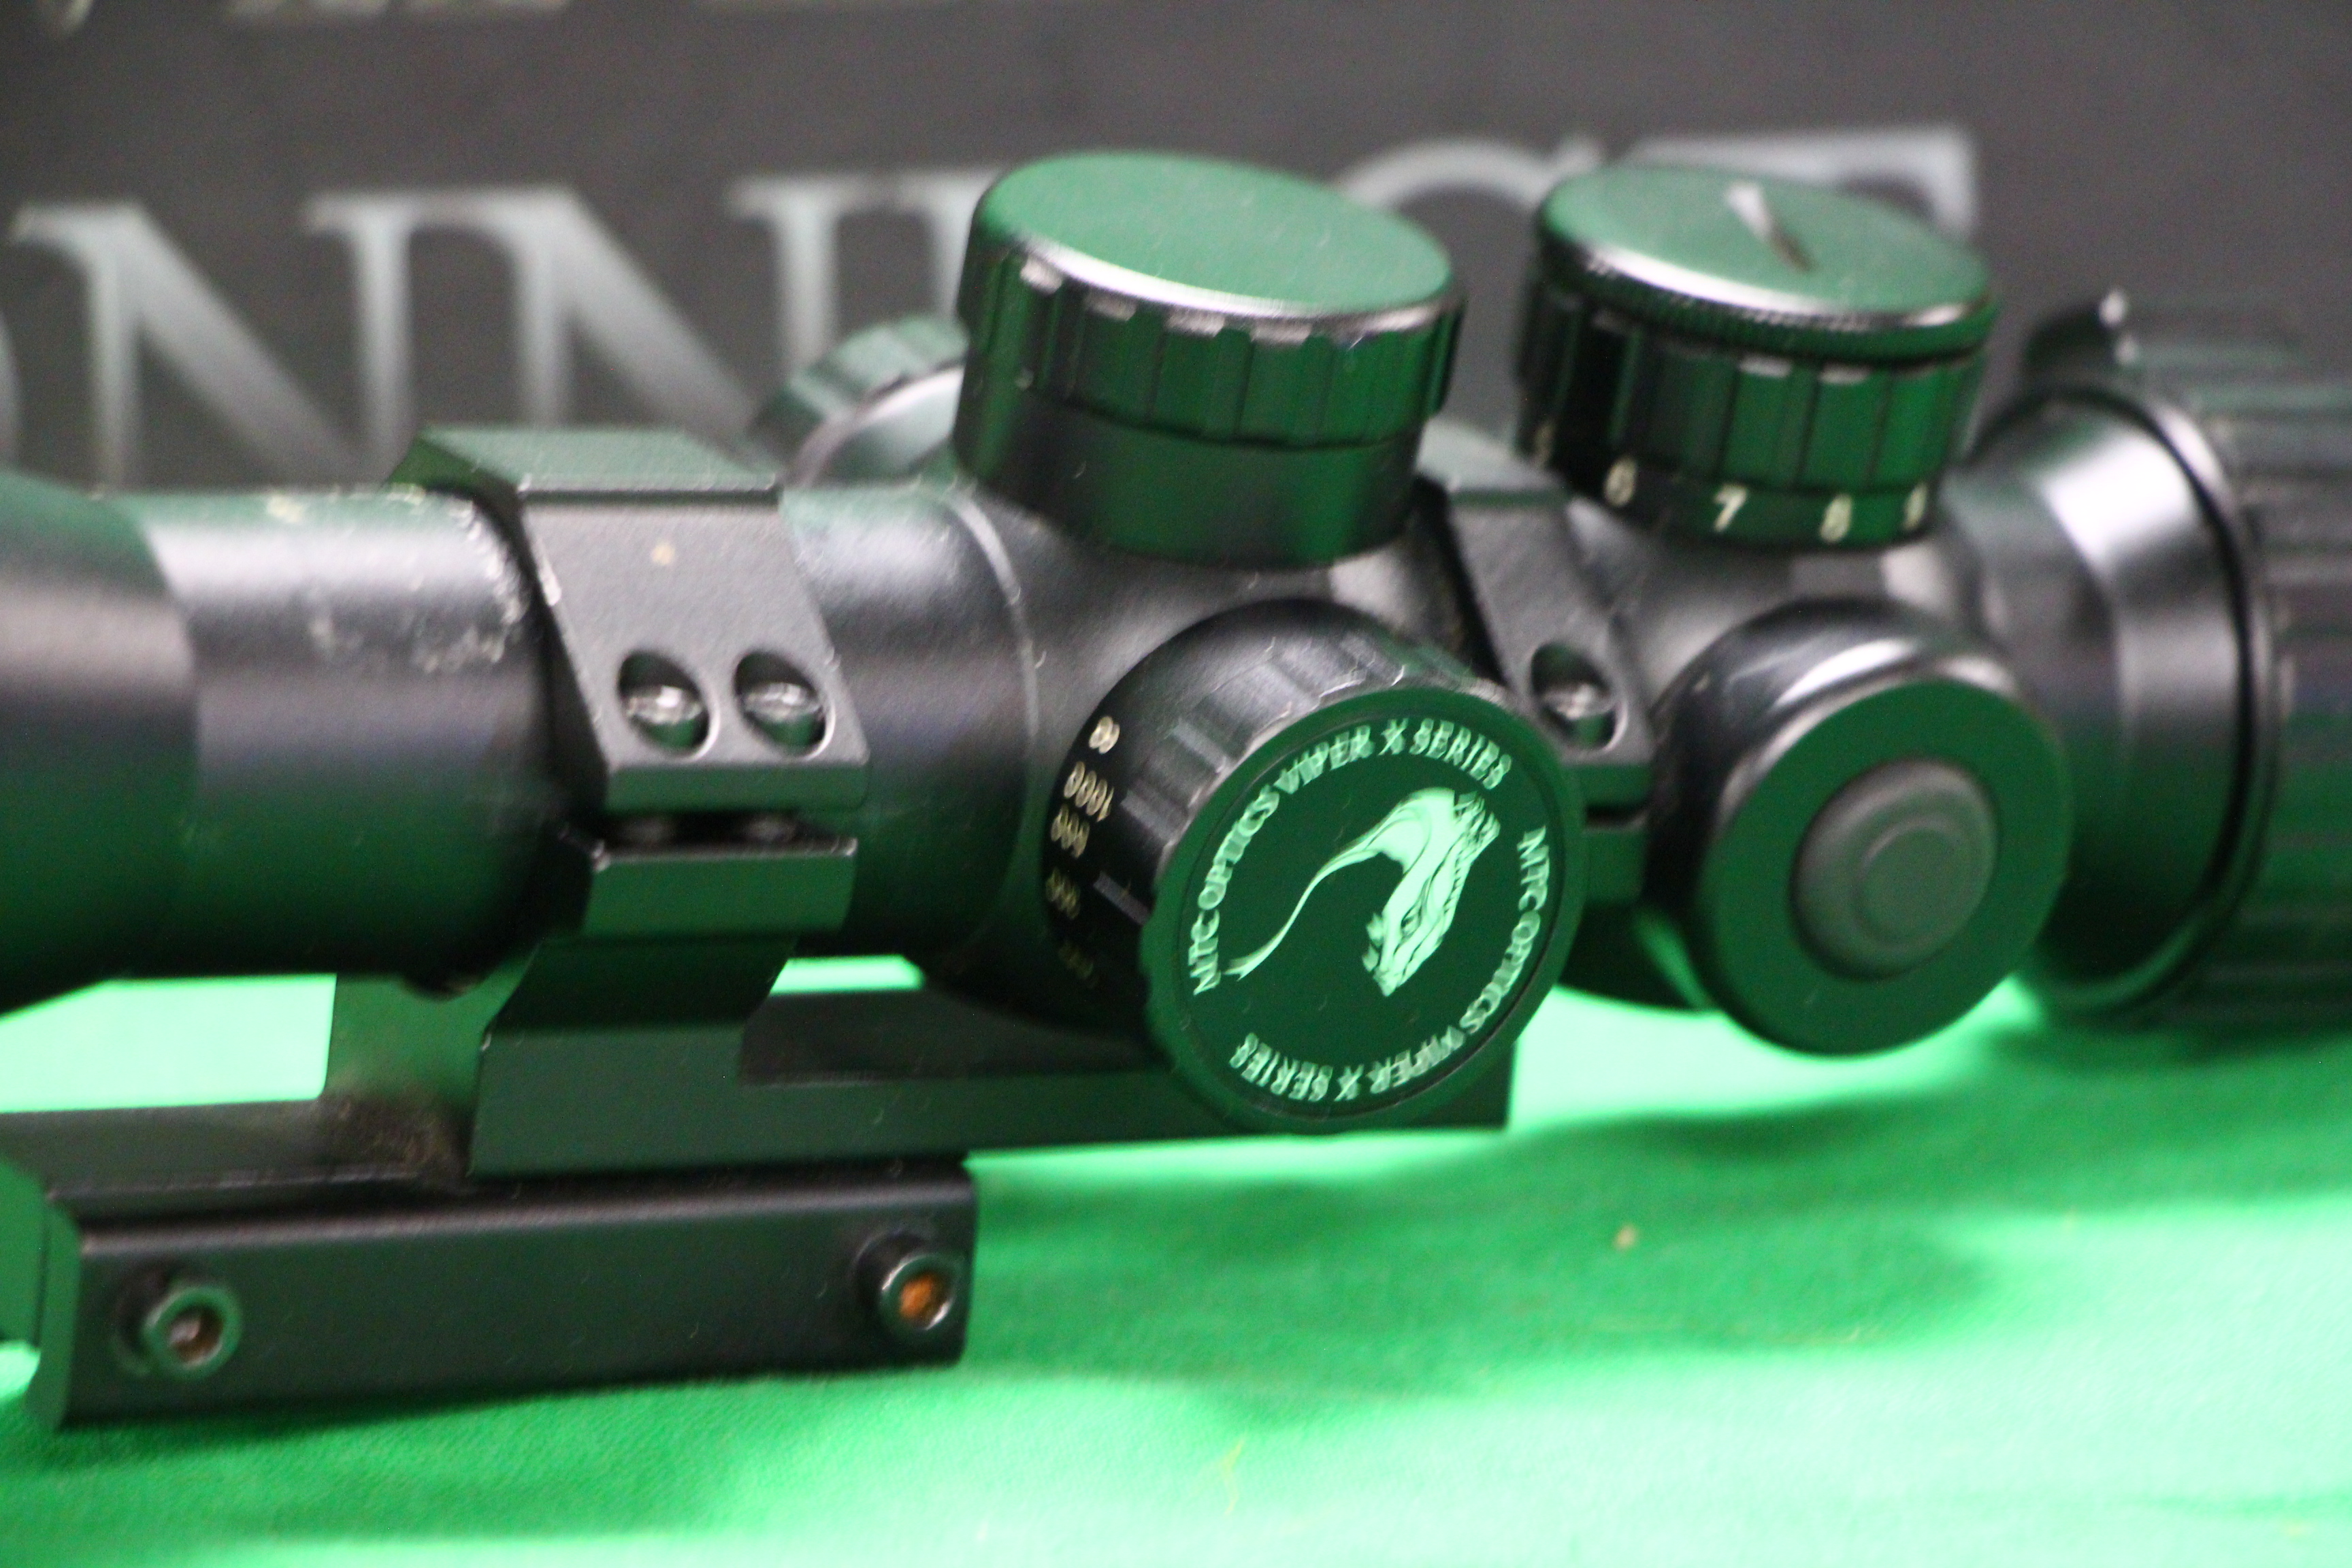 A BOXED MTC OPTICS VIPER X SERIES CONNECT 3-12 X32 RIFLE SCOPE WITH MOUNTS - Image 2 of 10